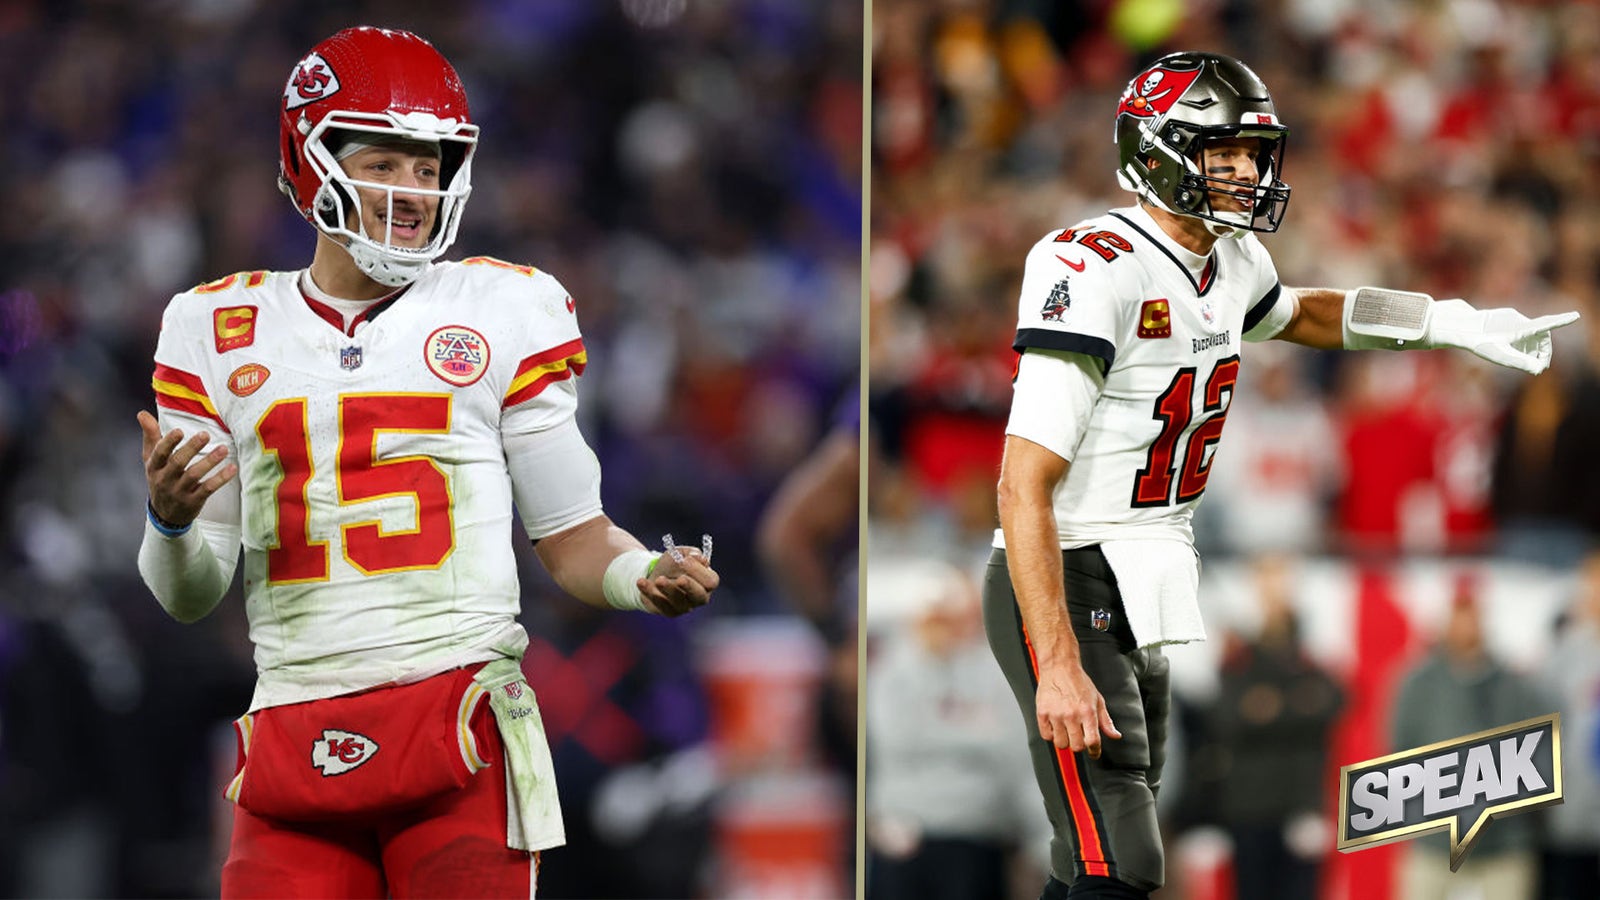 Does Patrick Mahomes need more rings than Tom Brady to surpass him as the GOAT?